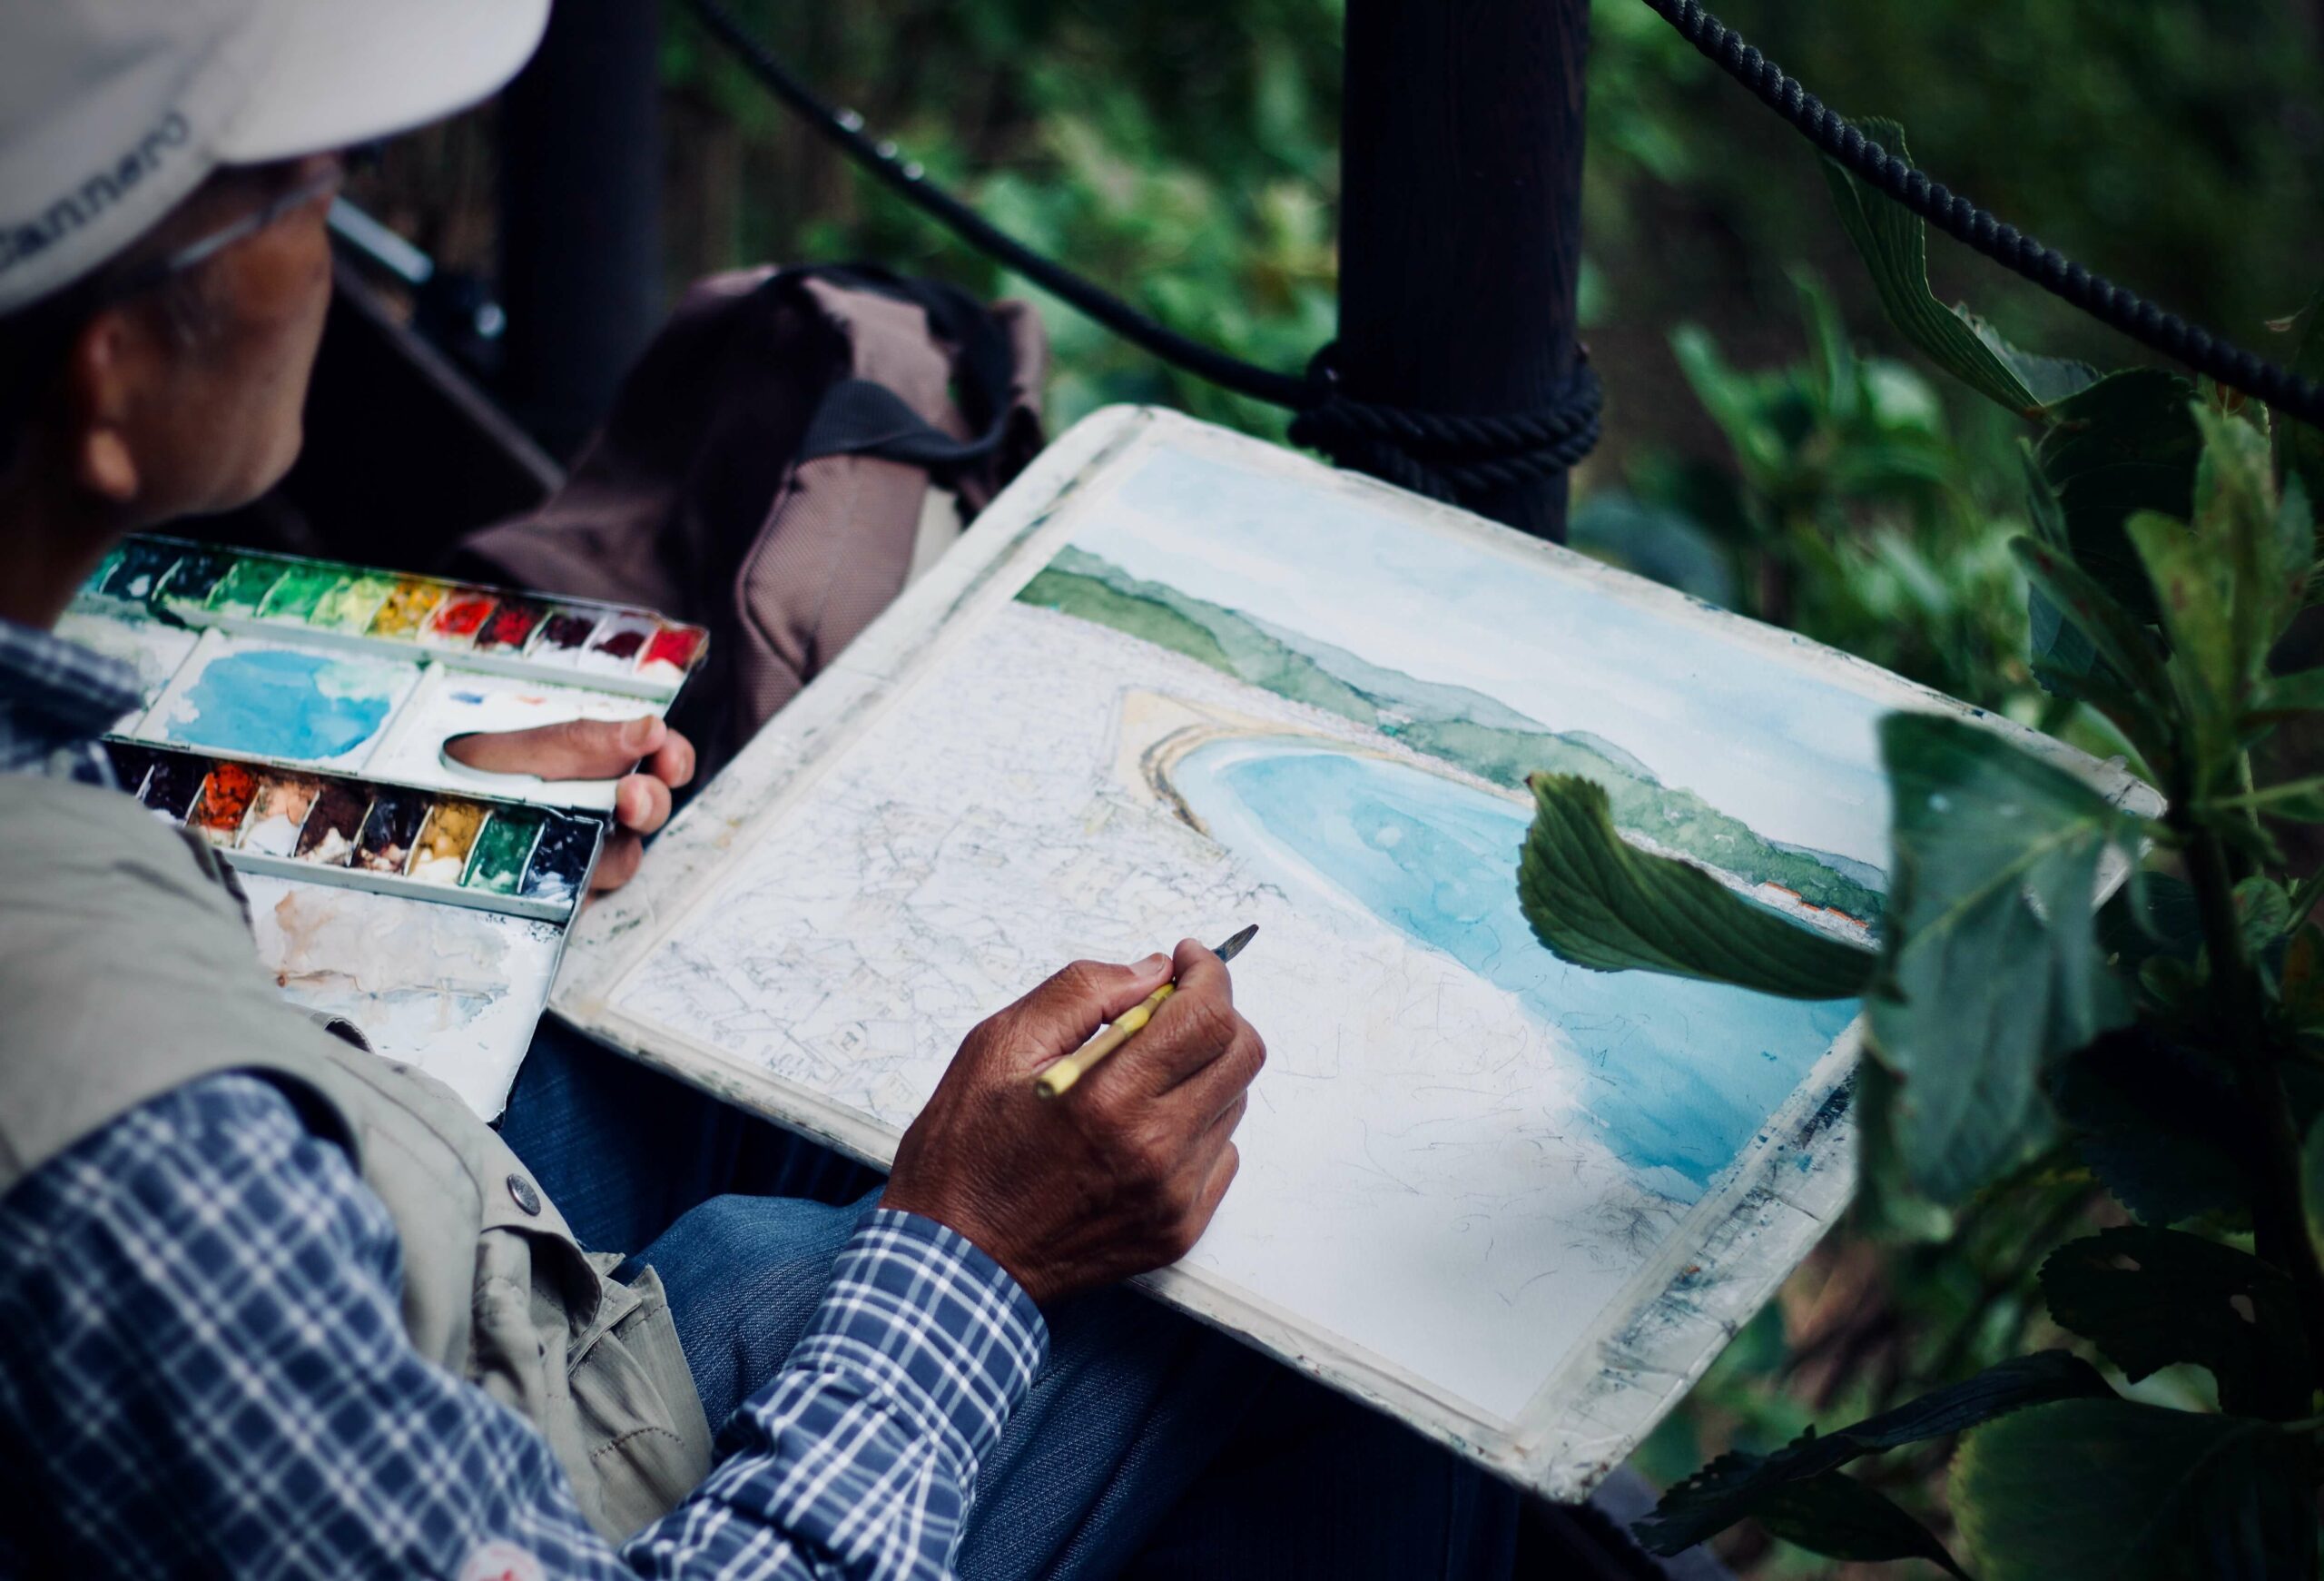 An Older Man Outside in a Wooded Scenic area Painting a Landscape in Watercolour Paints